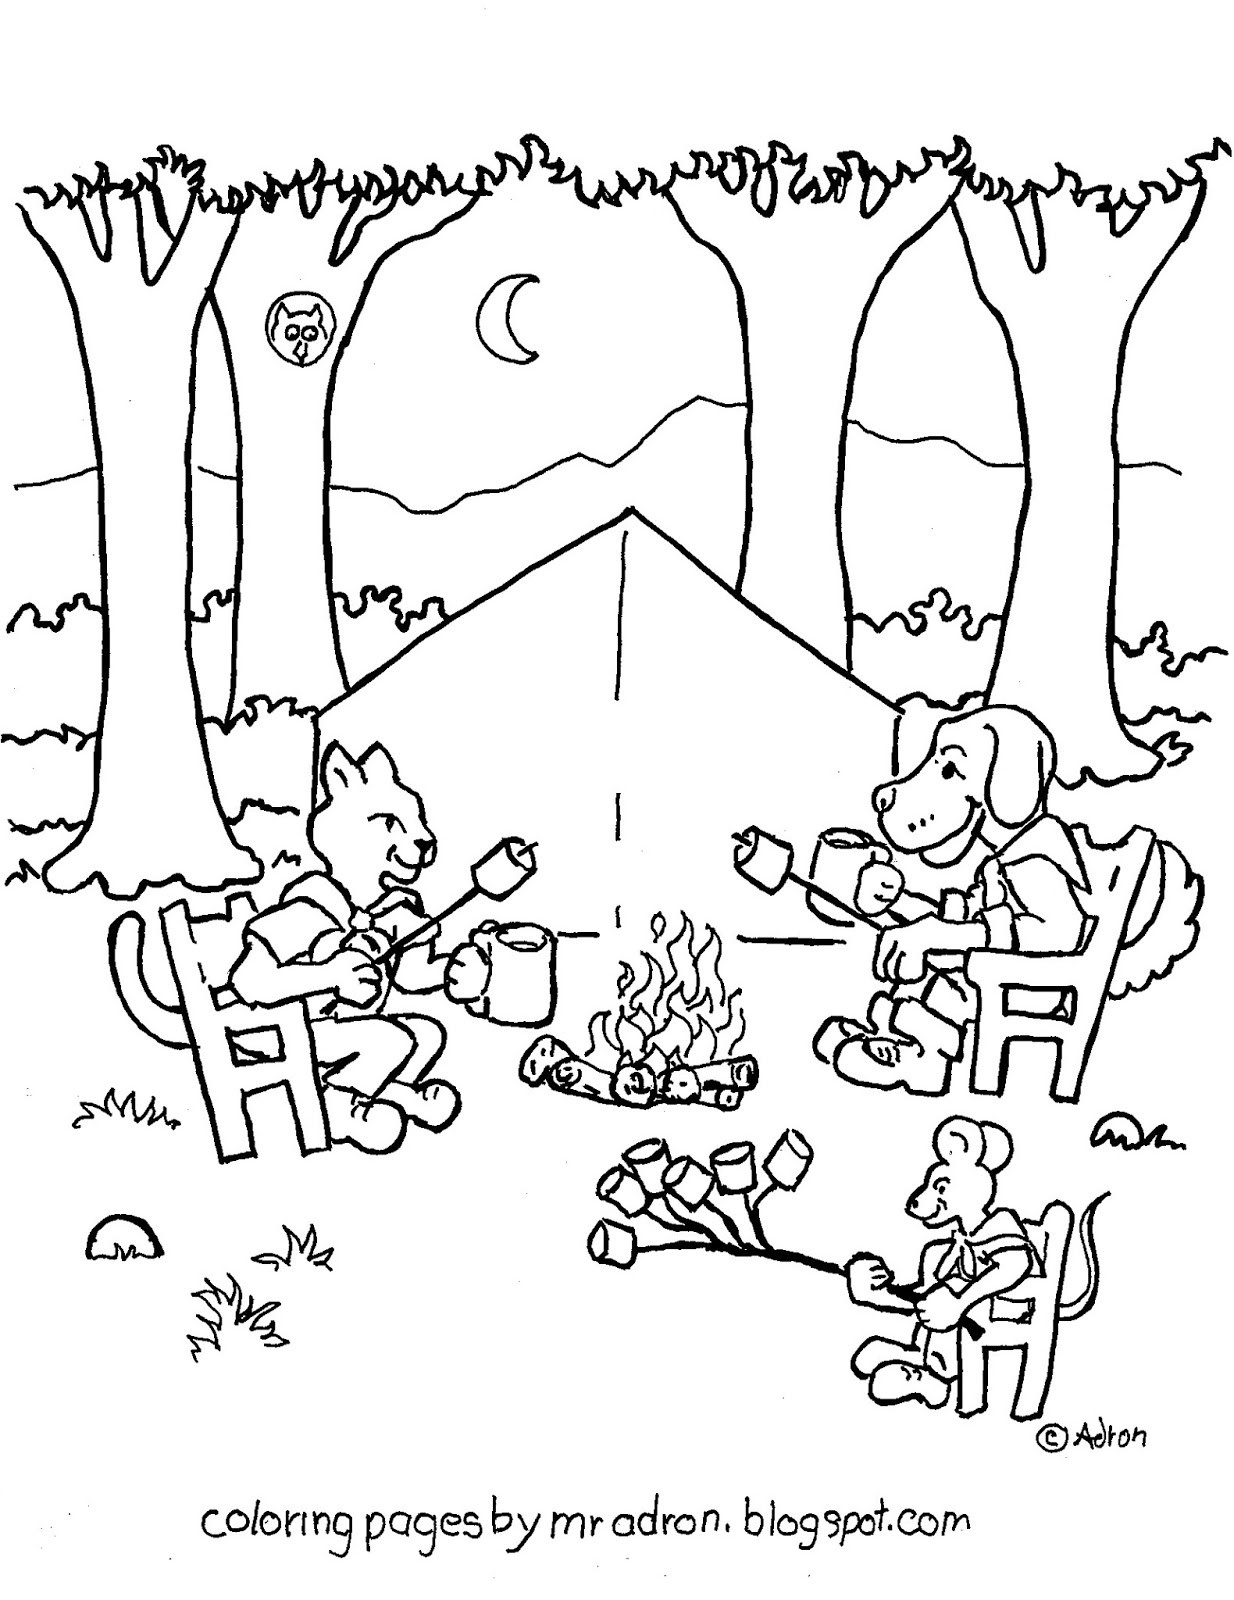 Camping Coloring Pages For Kids
 Coloring Pages for Kids by Mr Adron Animal Friends Camp